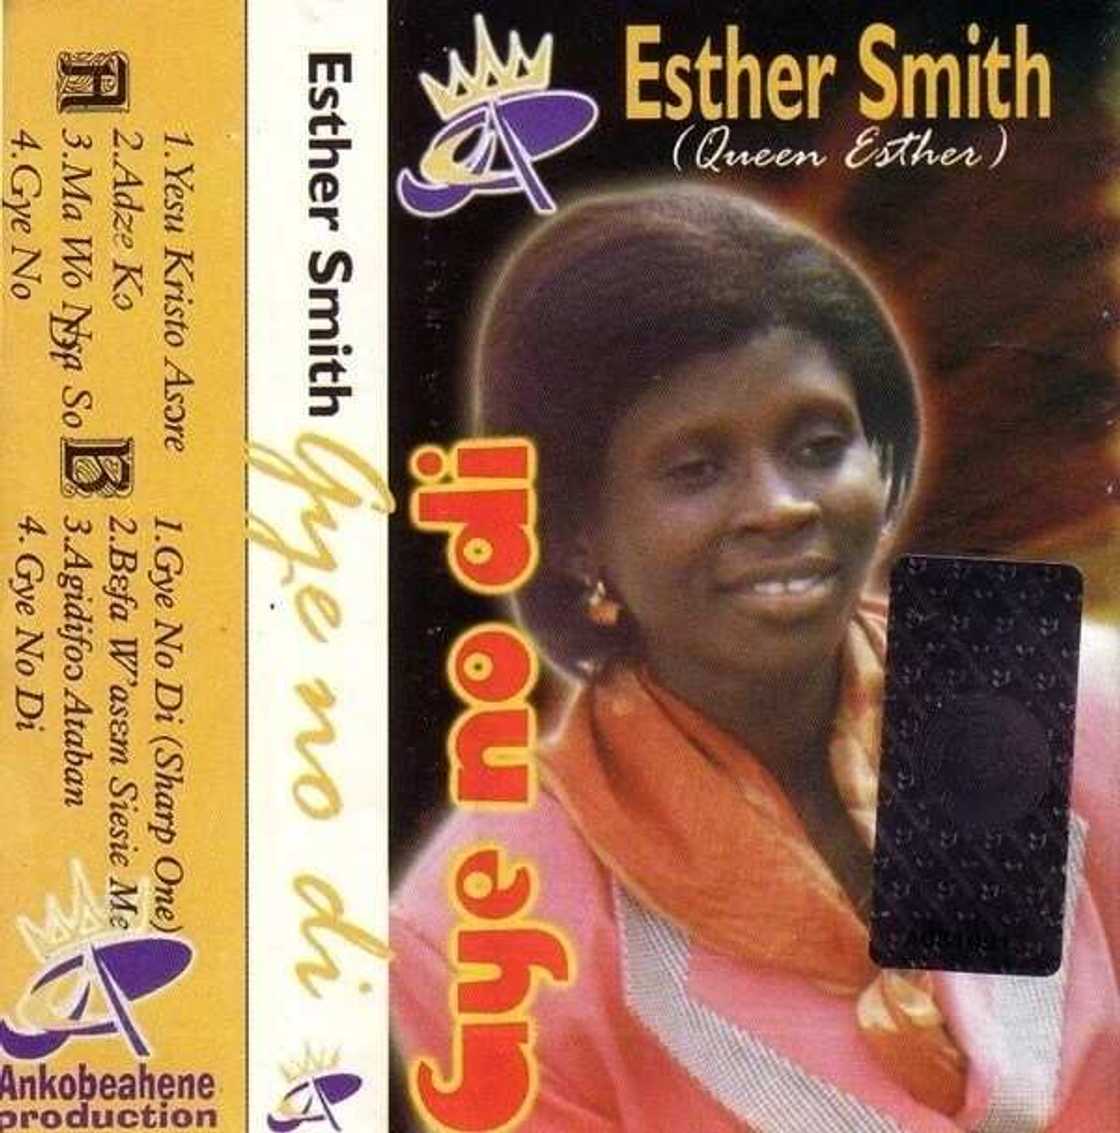 esther smith hit songs, esther smith songs list, esther smith songs mix